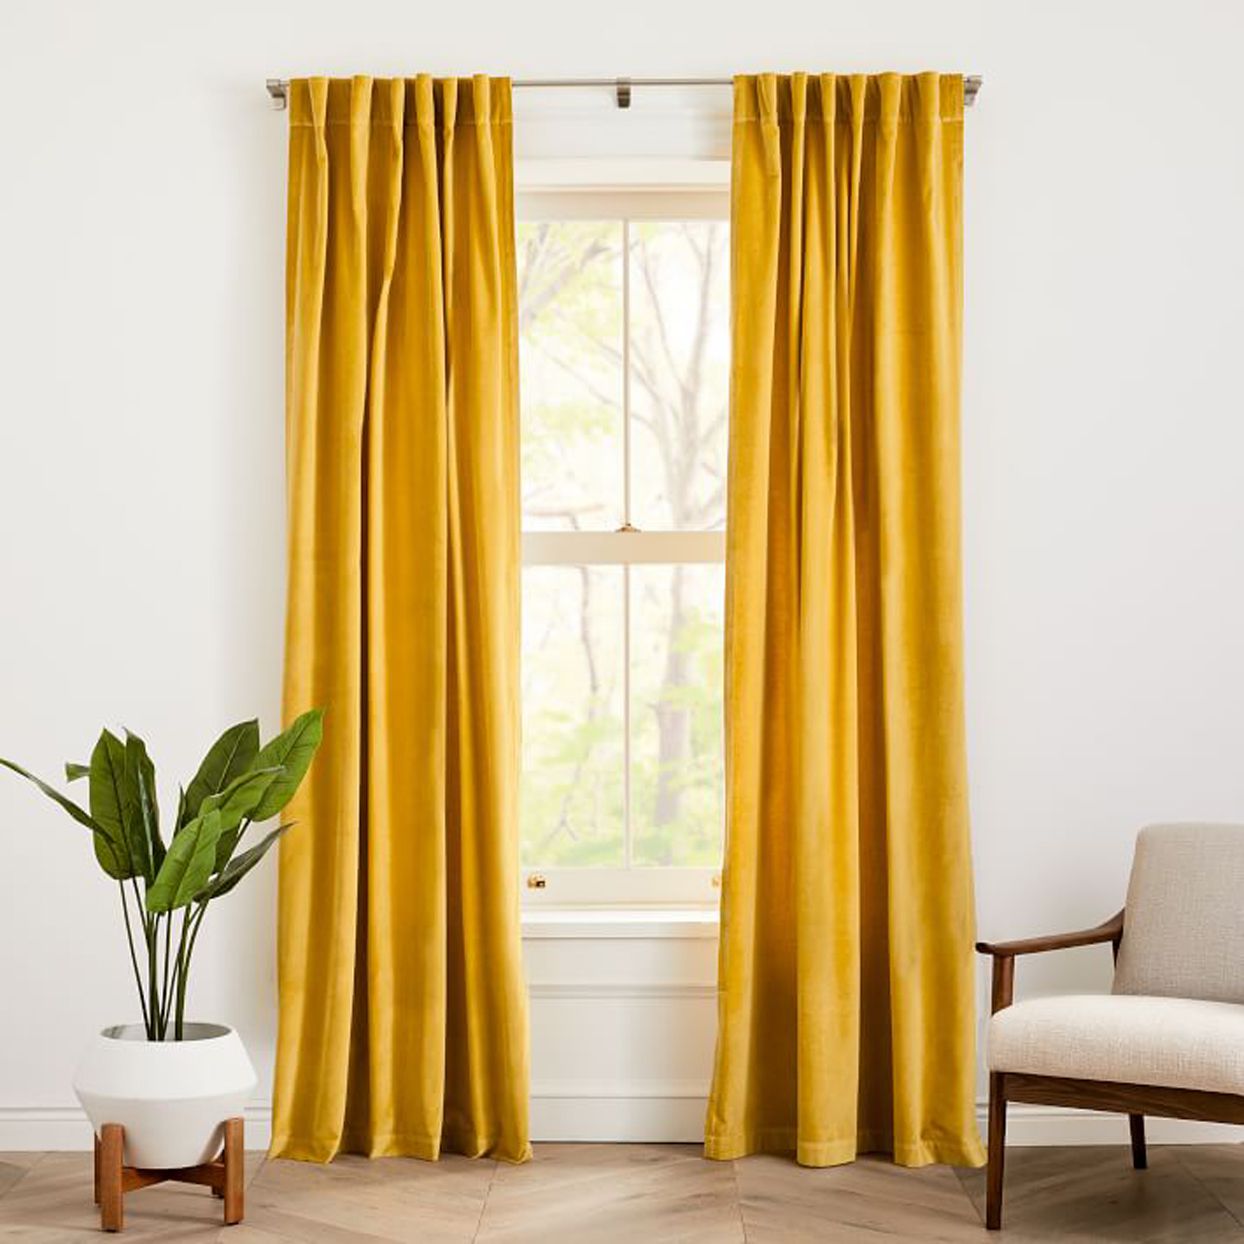 The Best Living Room Curtain Ideas, Best Curtains For Living Room